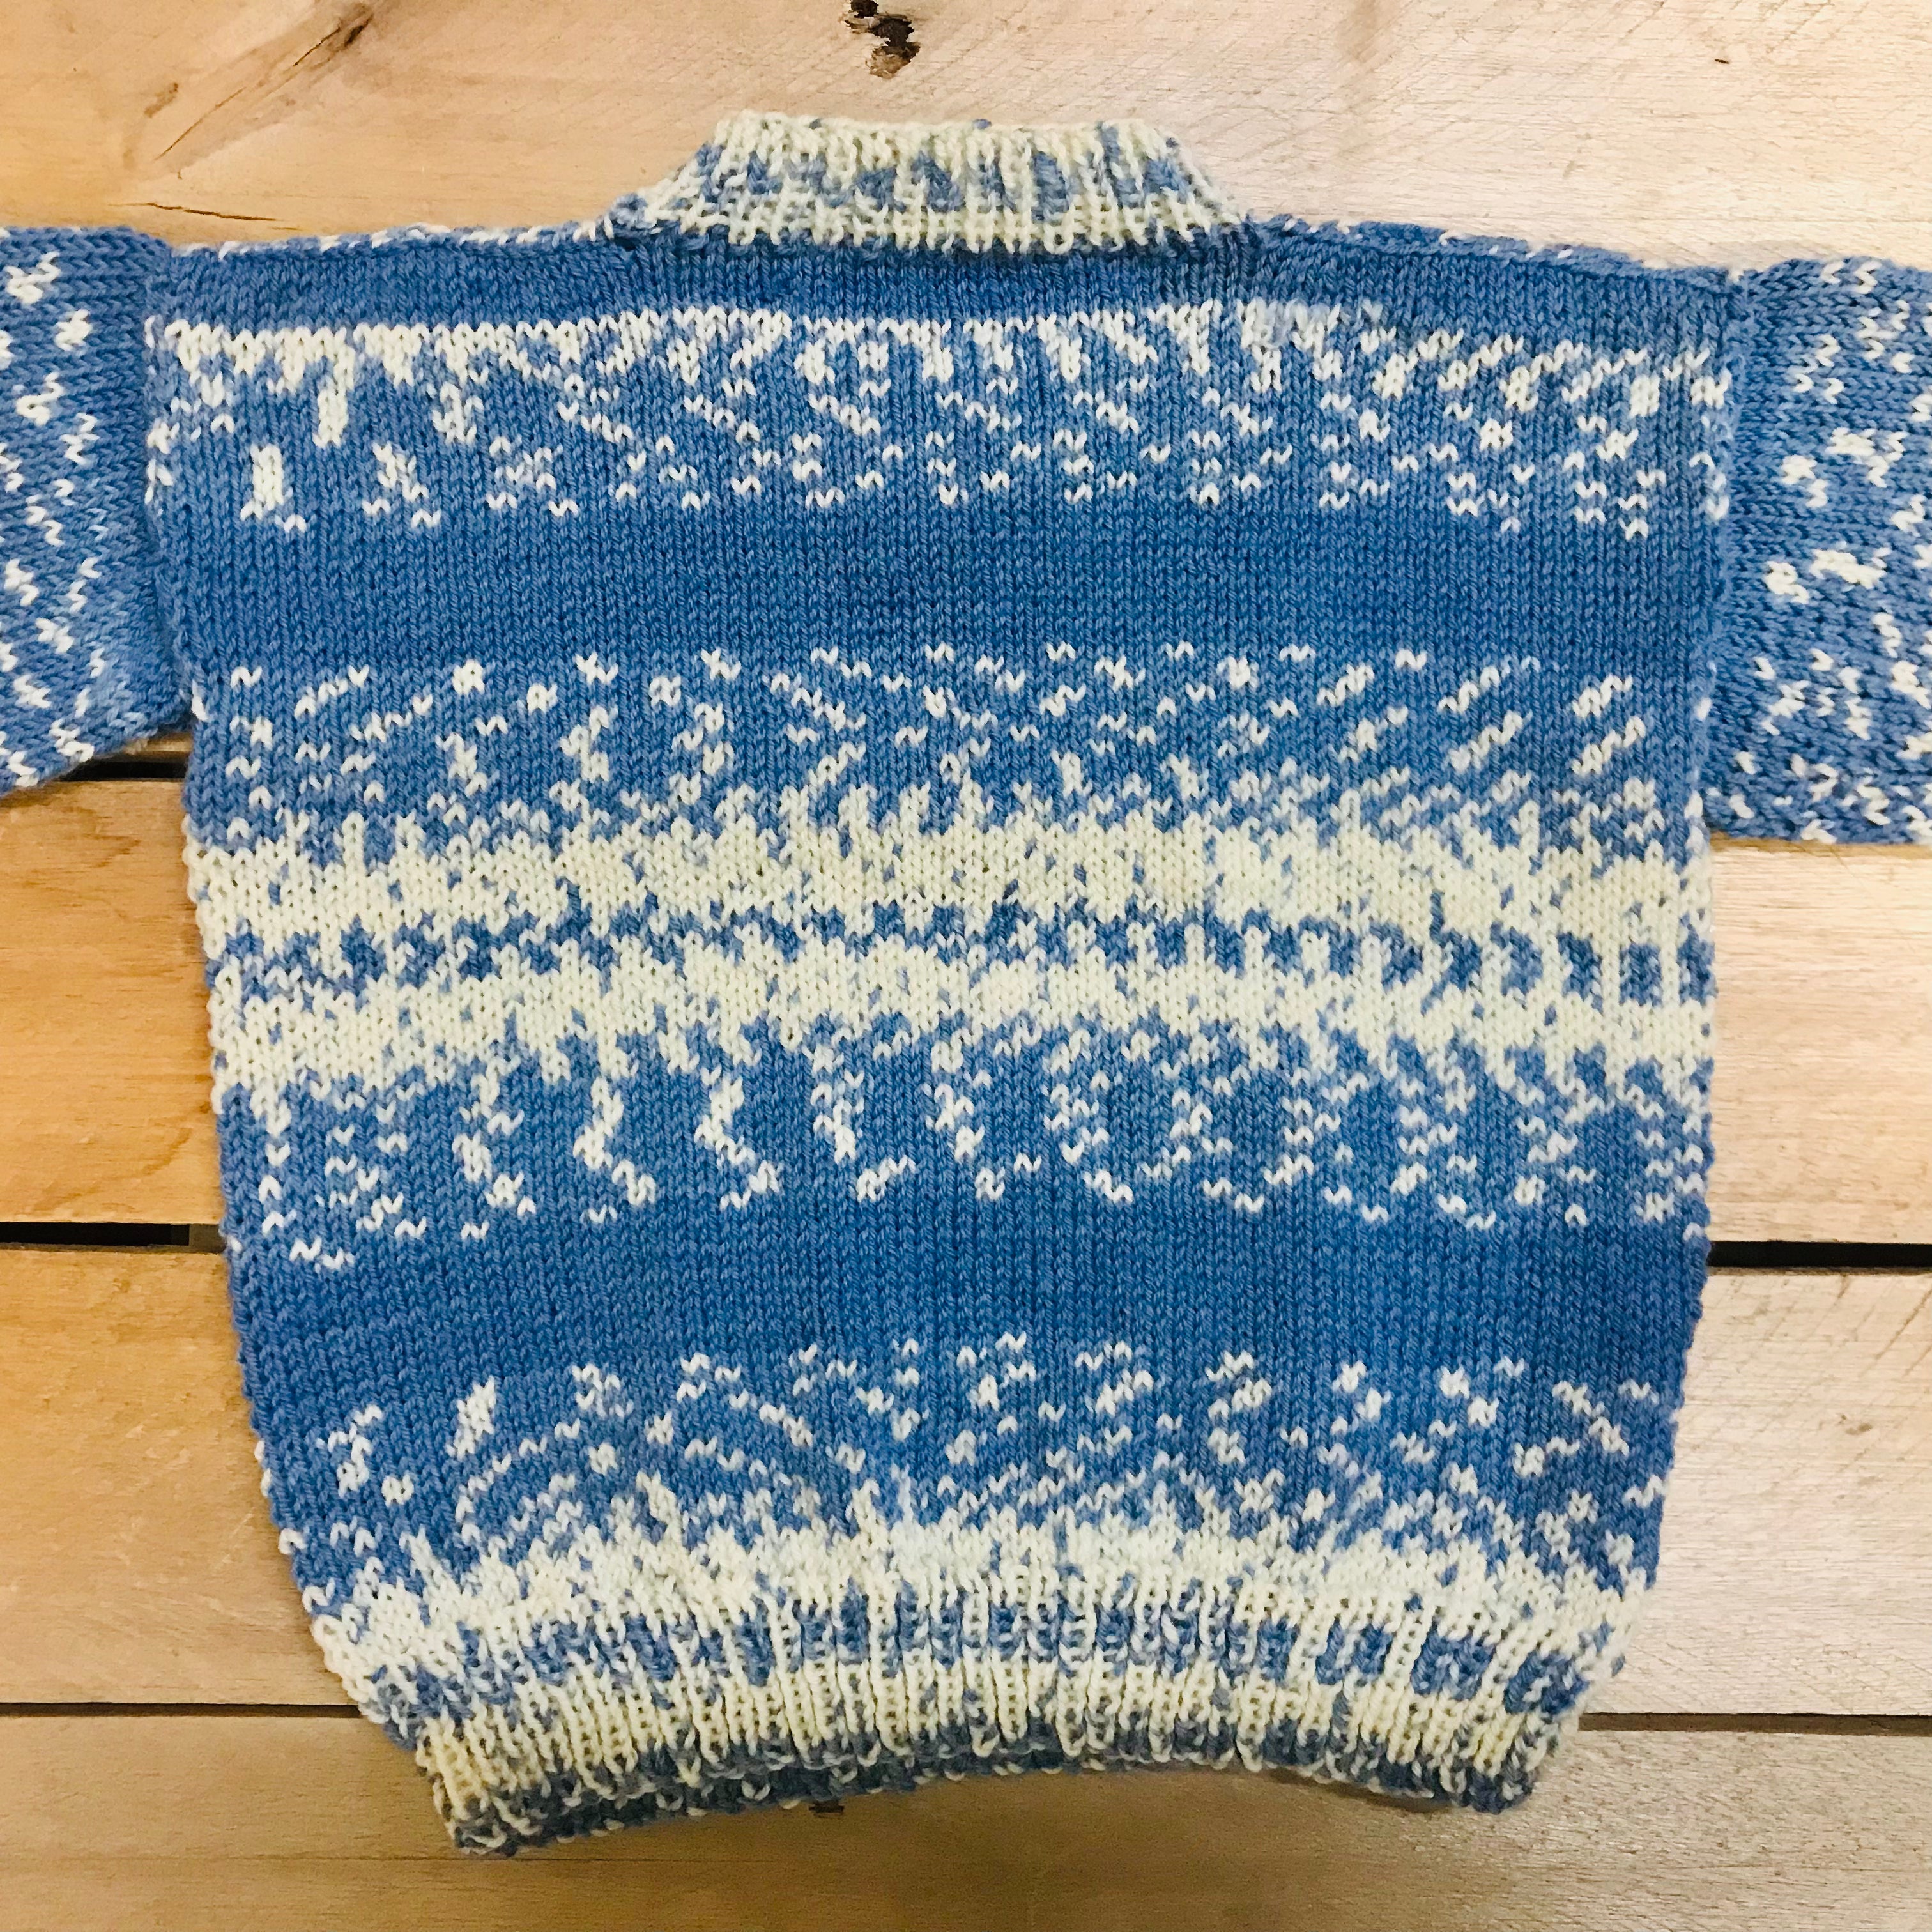 hand-knitted locally - Child Blue greys variegated self patterning  Jumper